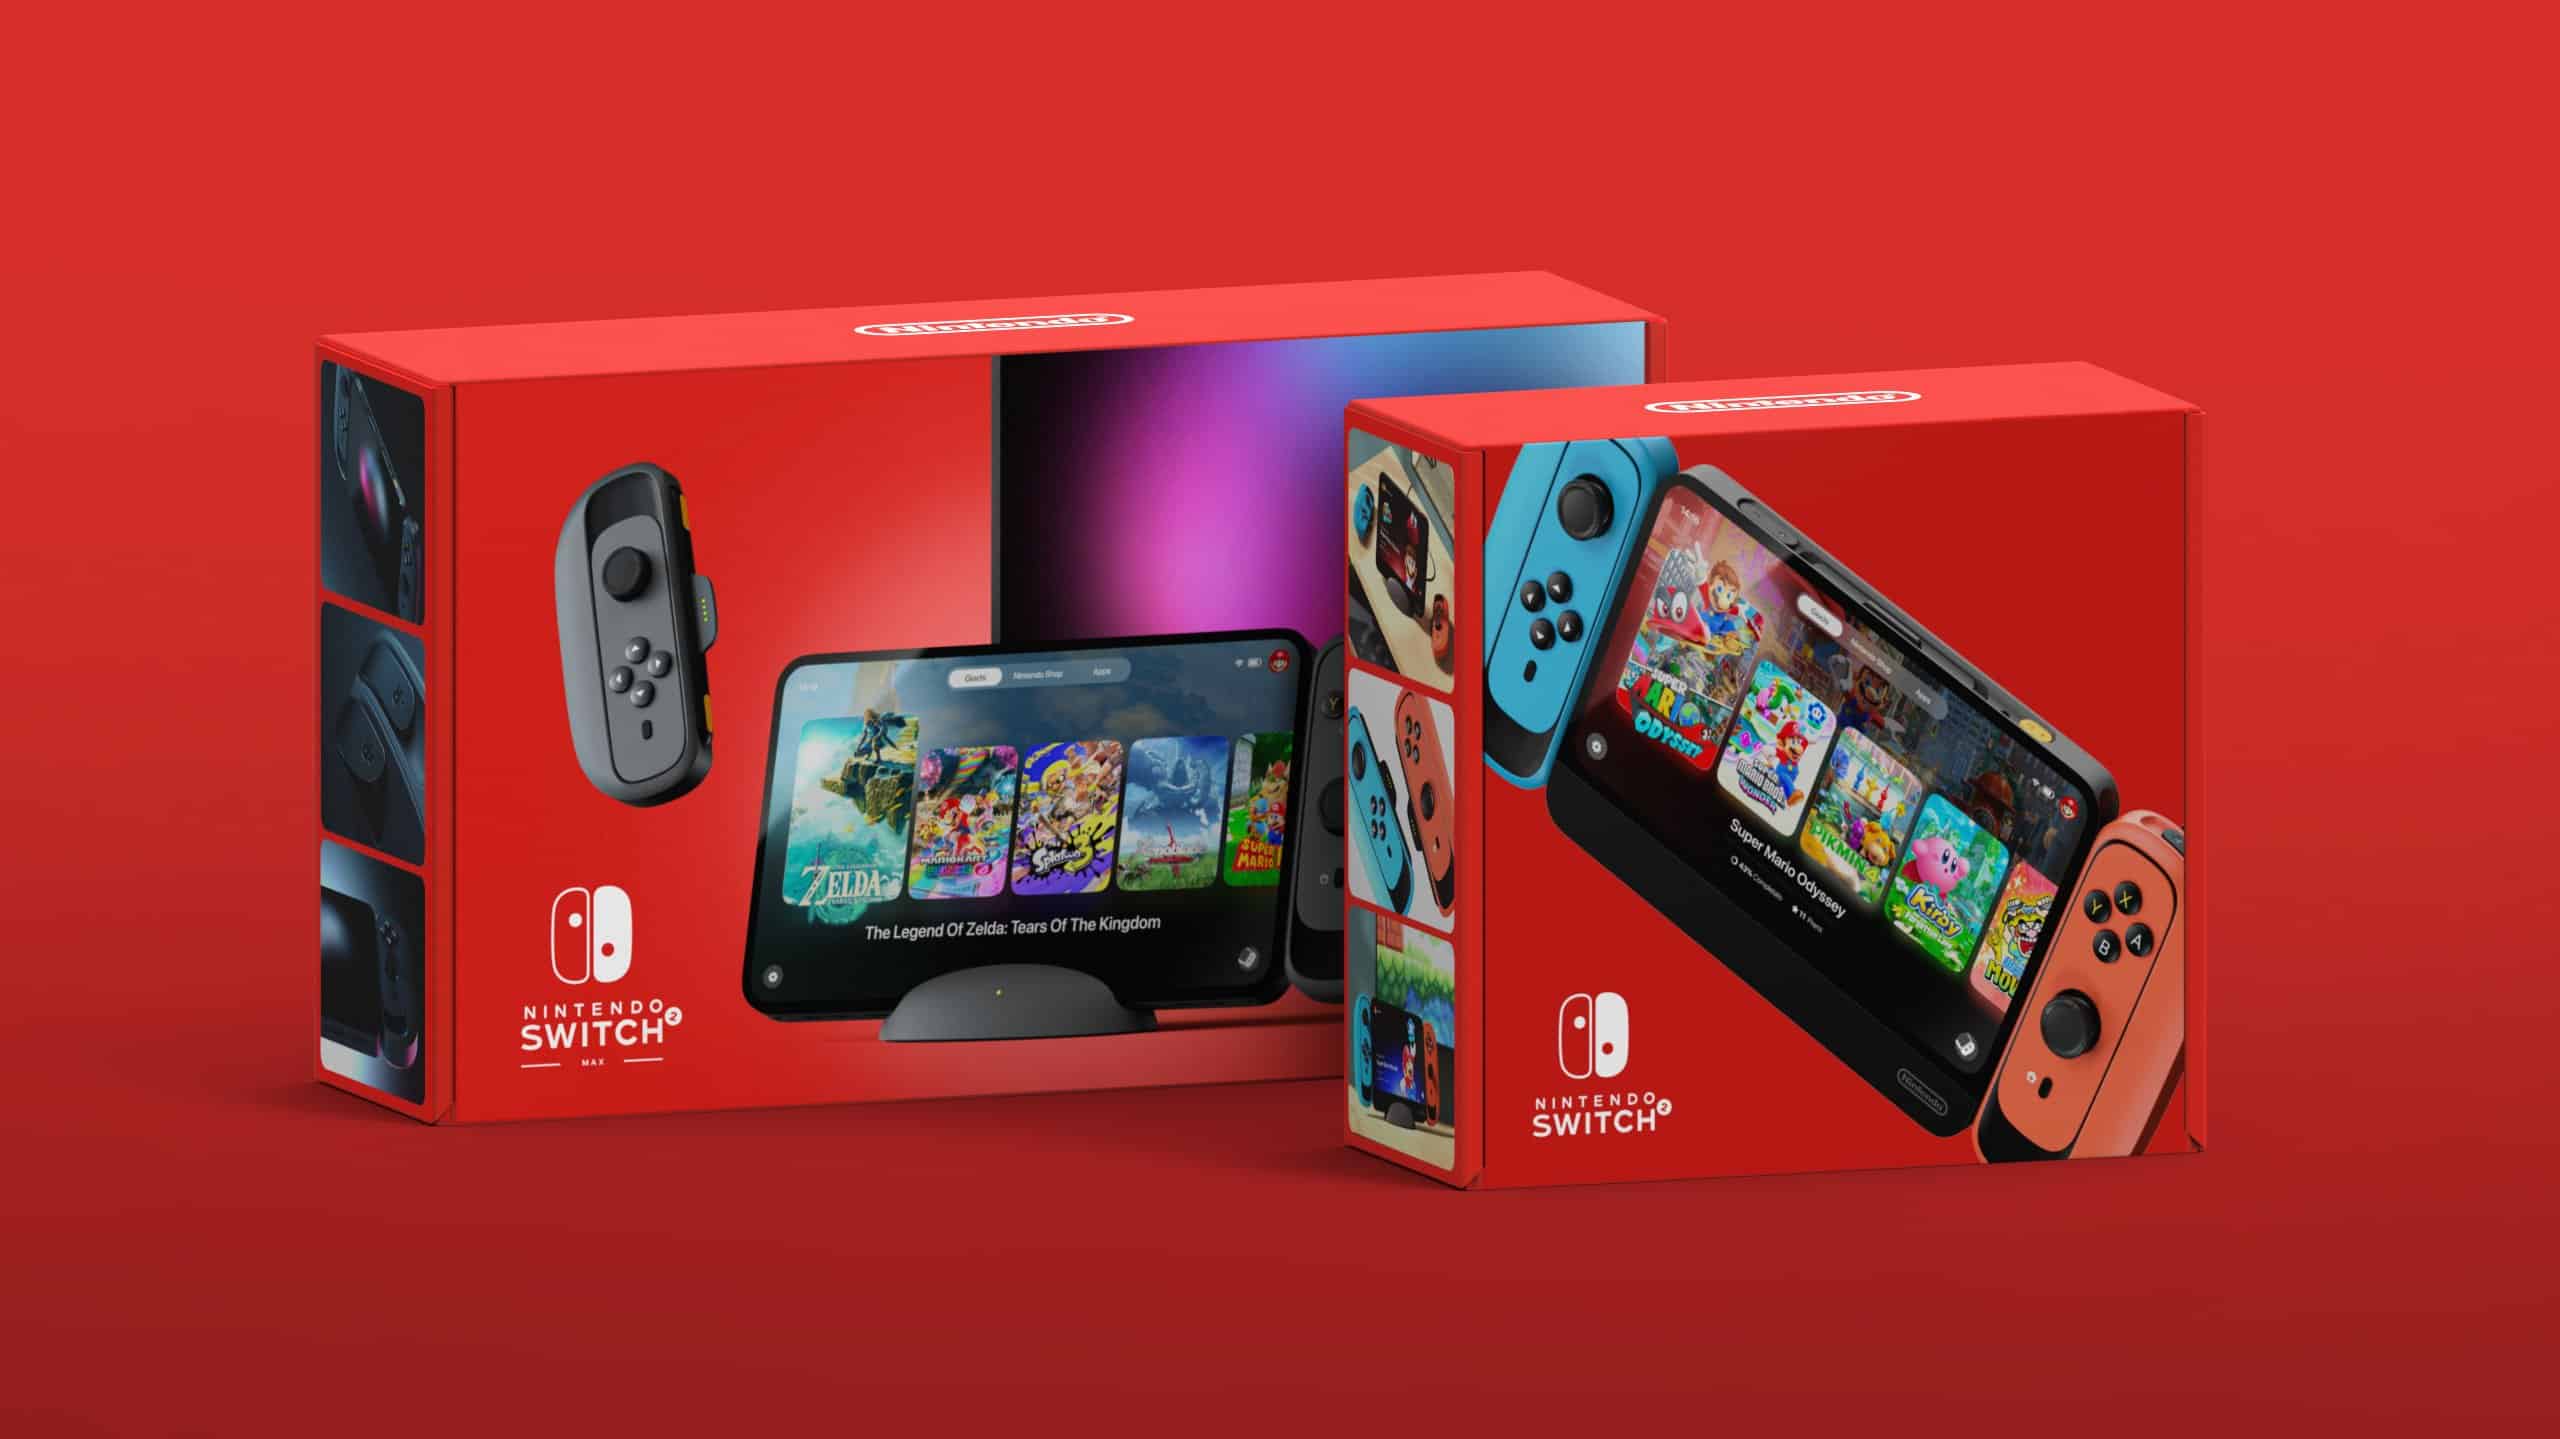 Nintendo Switch 2 Fake Images and Video Are Making the Rounds Online